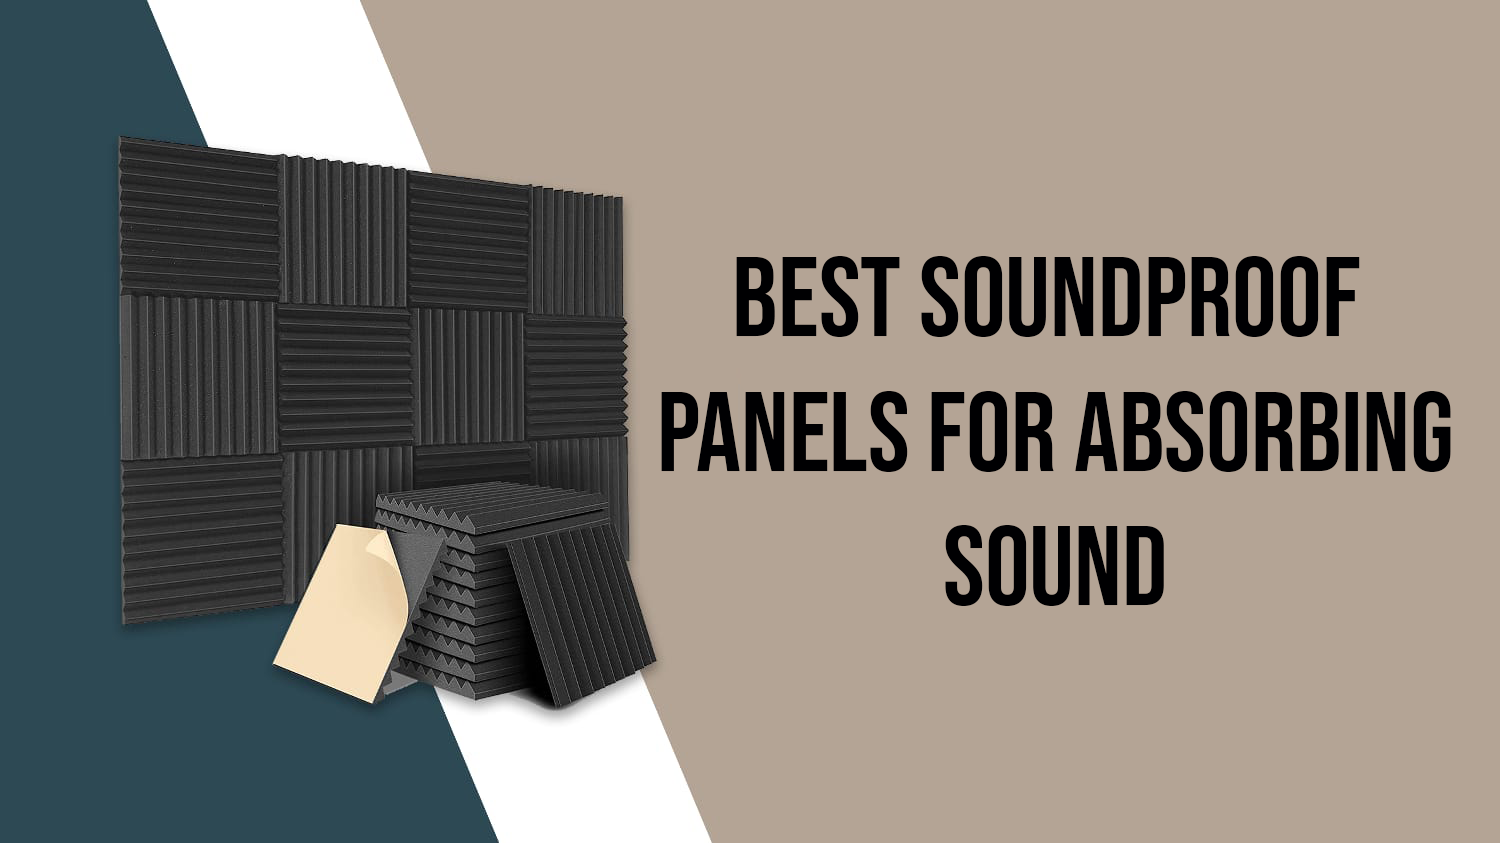 Best soundproof panels for absorbing sound